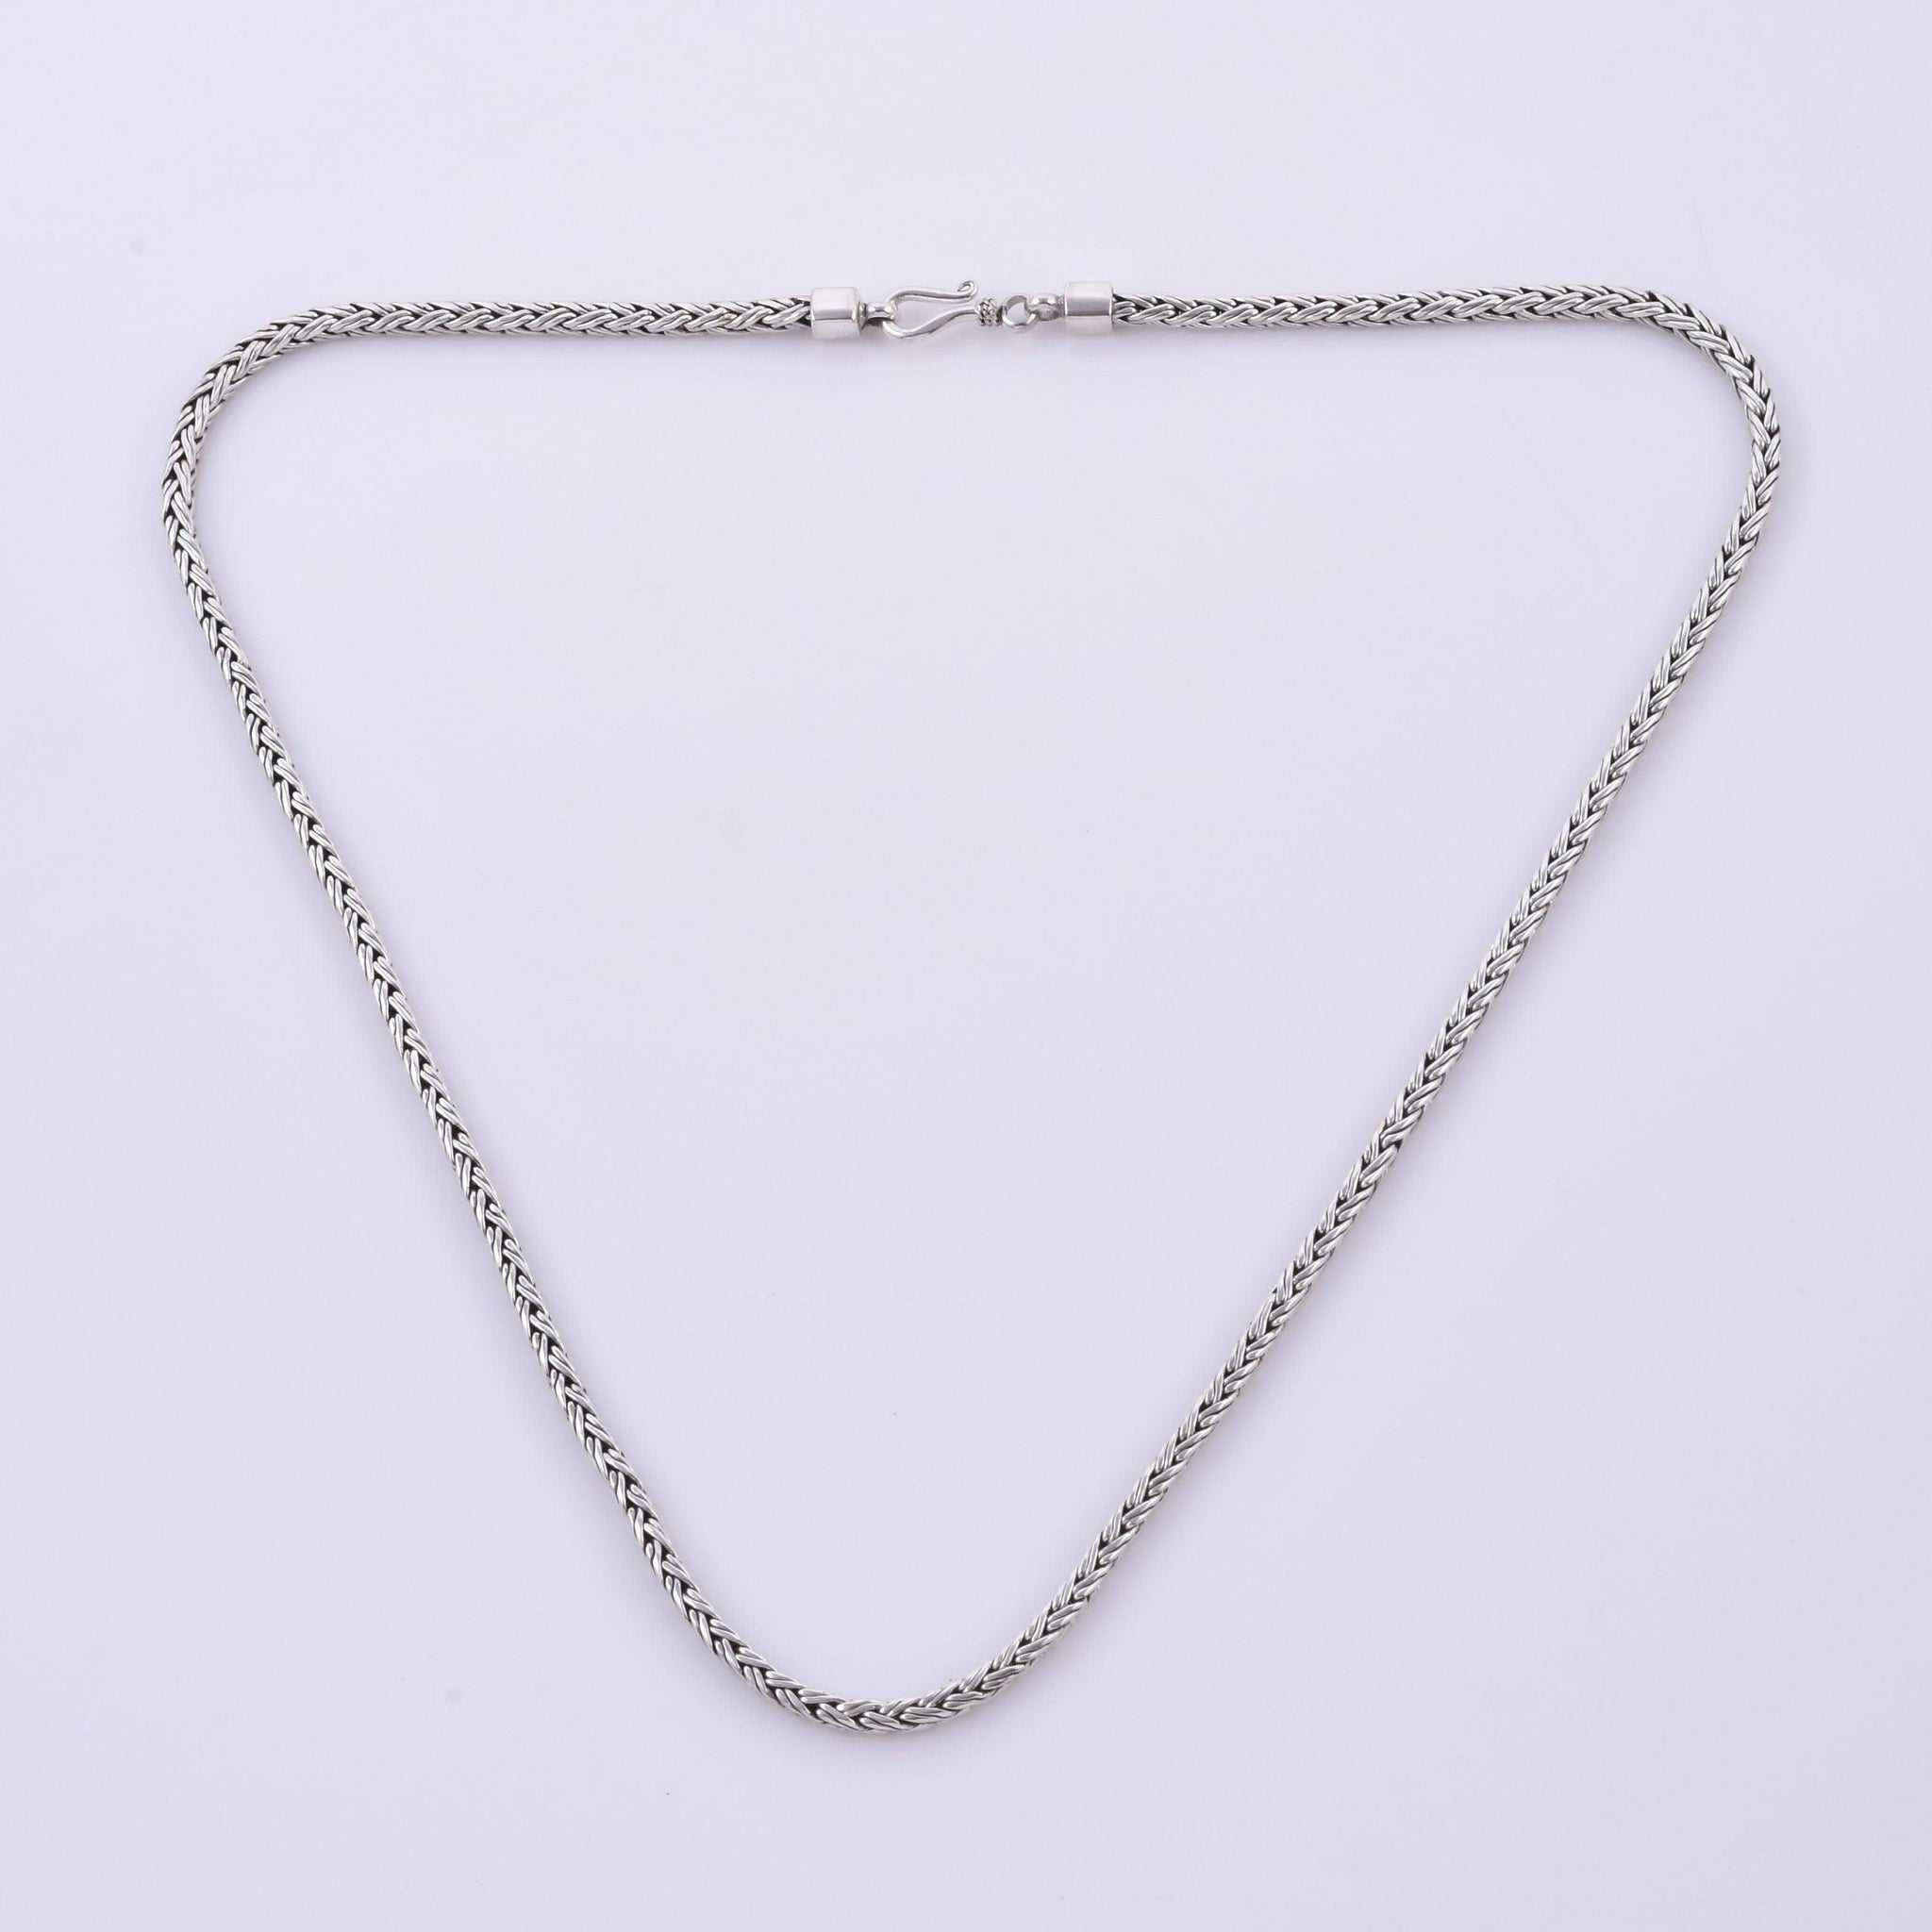 Handmade WHEAT CHAIN Necklace in 925 Sterling Silver 20 Inch 3 mm 31 Grams - Inspiring Jewellery